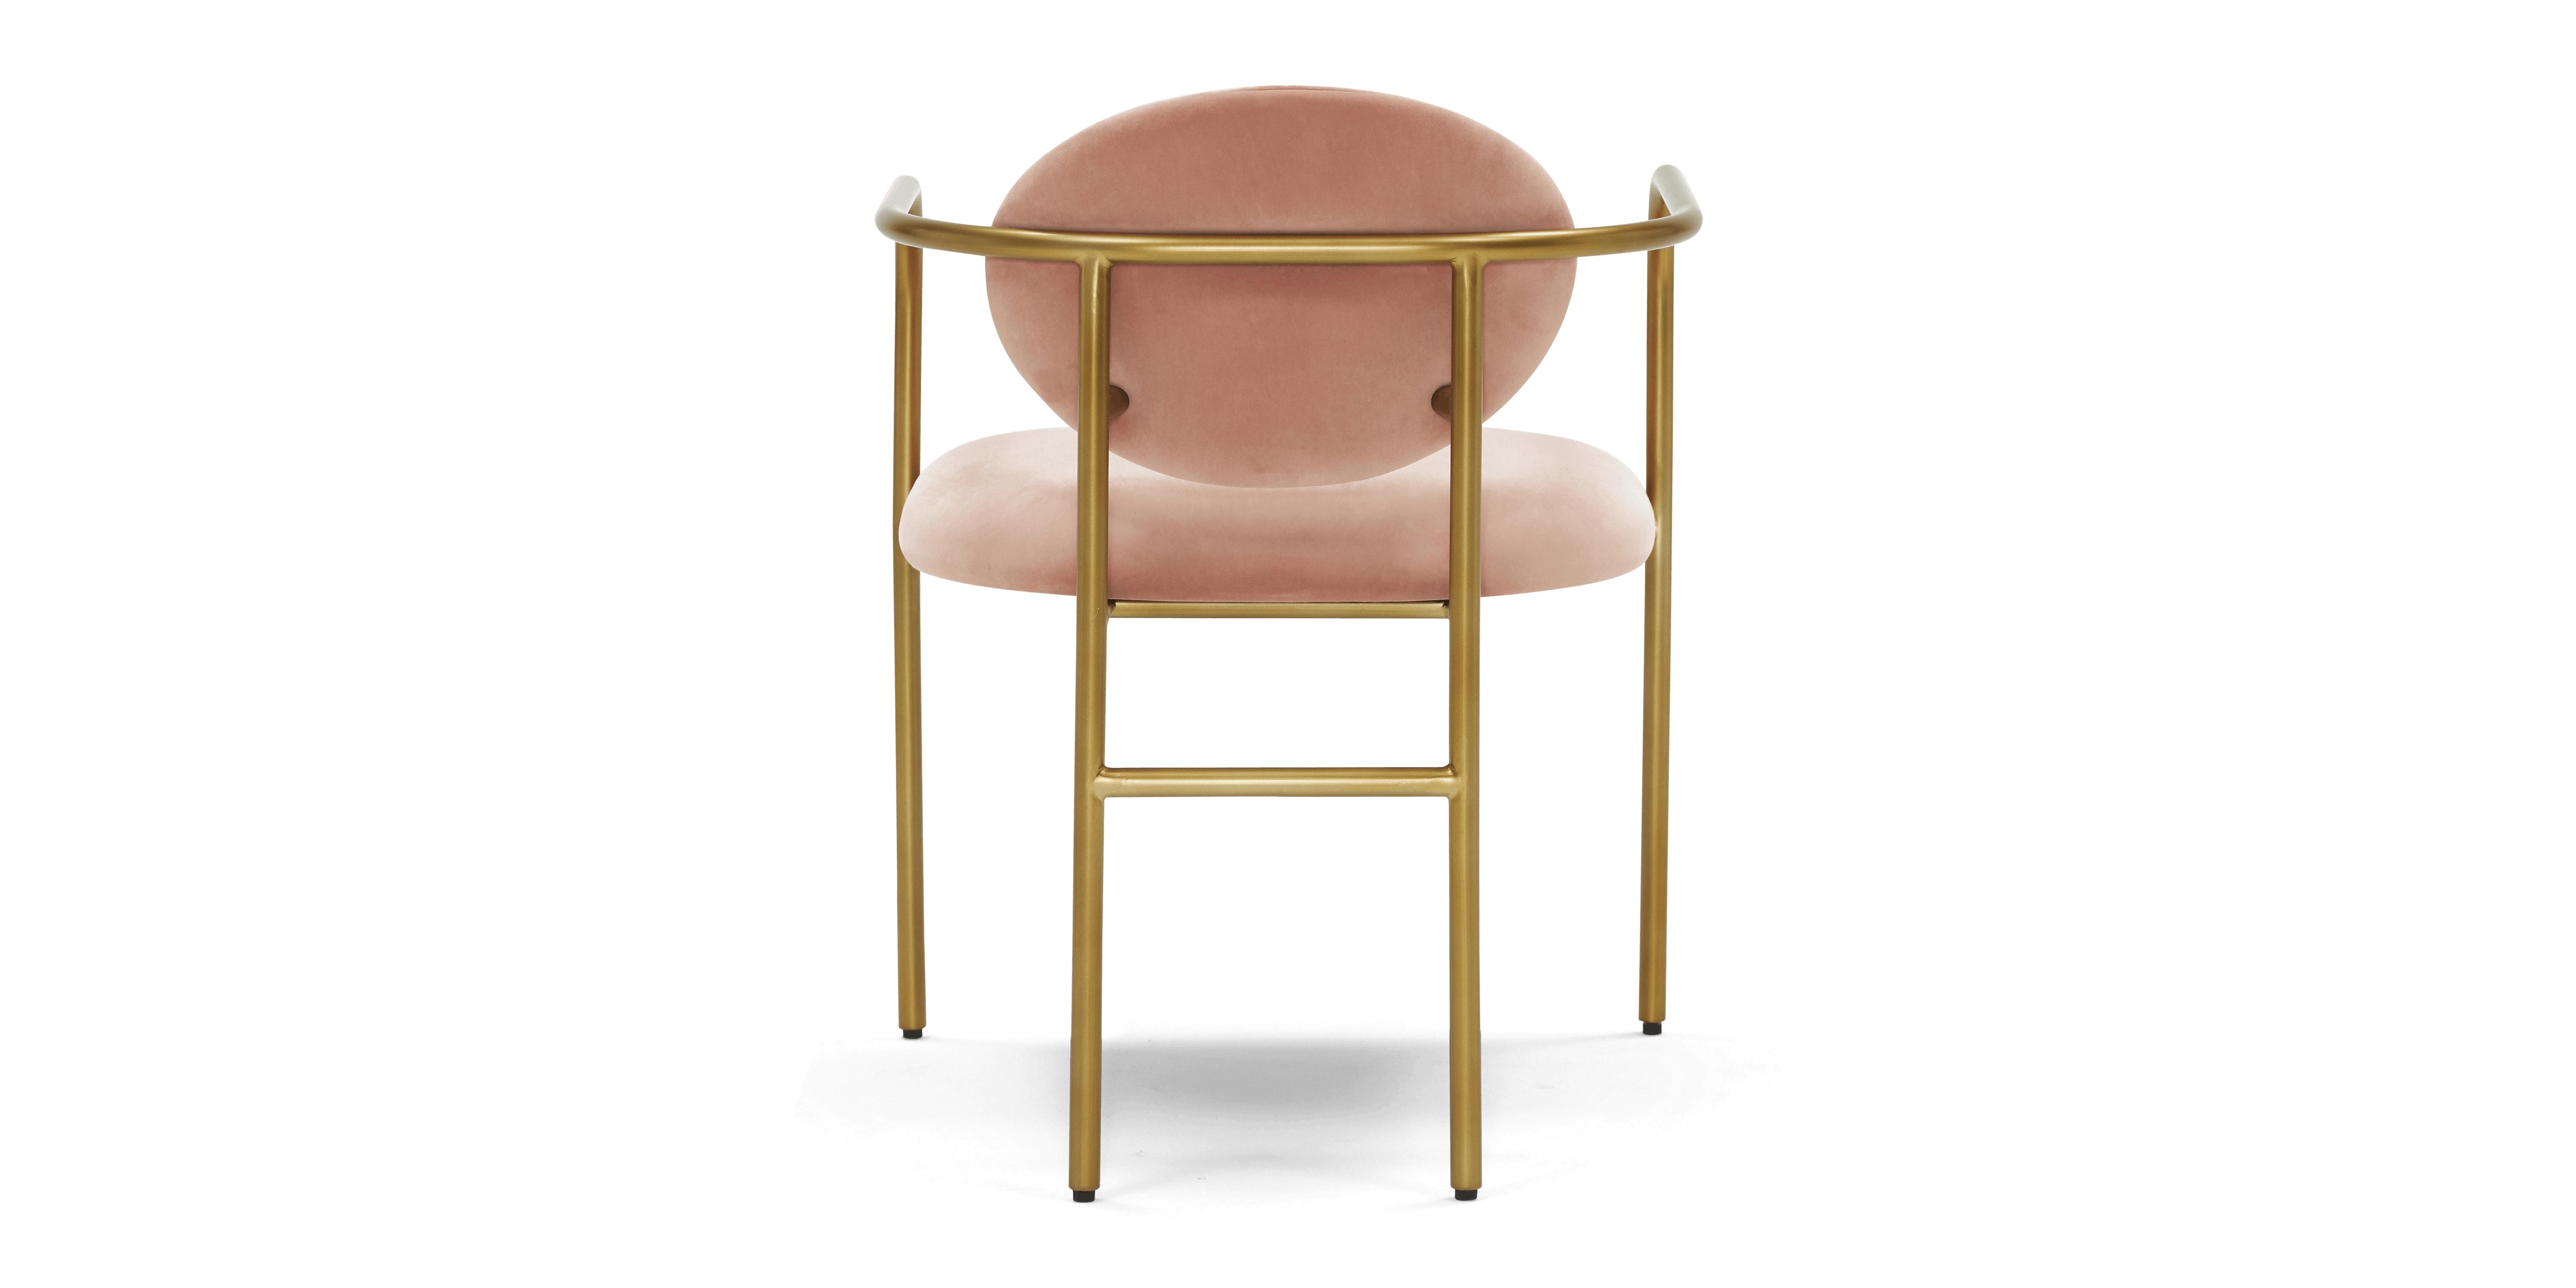 Pink Soleil Mid Century Modern Dining Chair - Royale Blush - Image 4